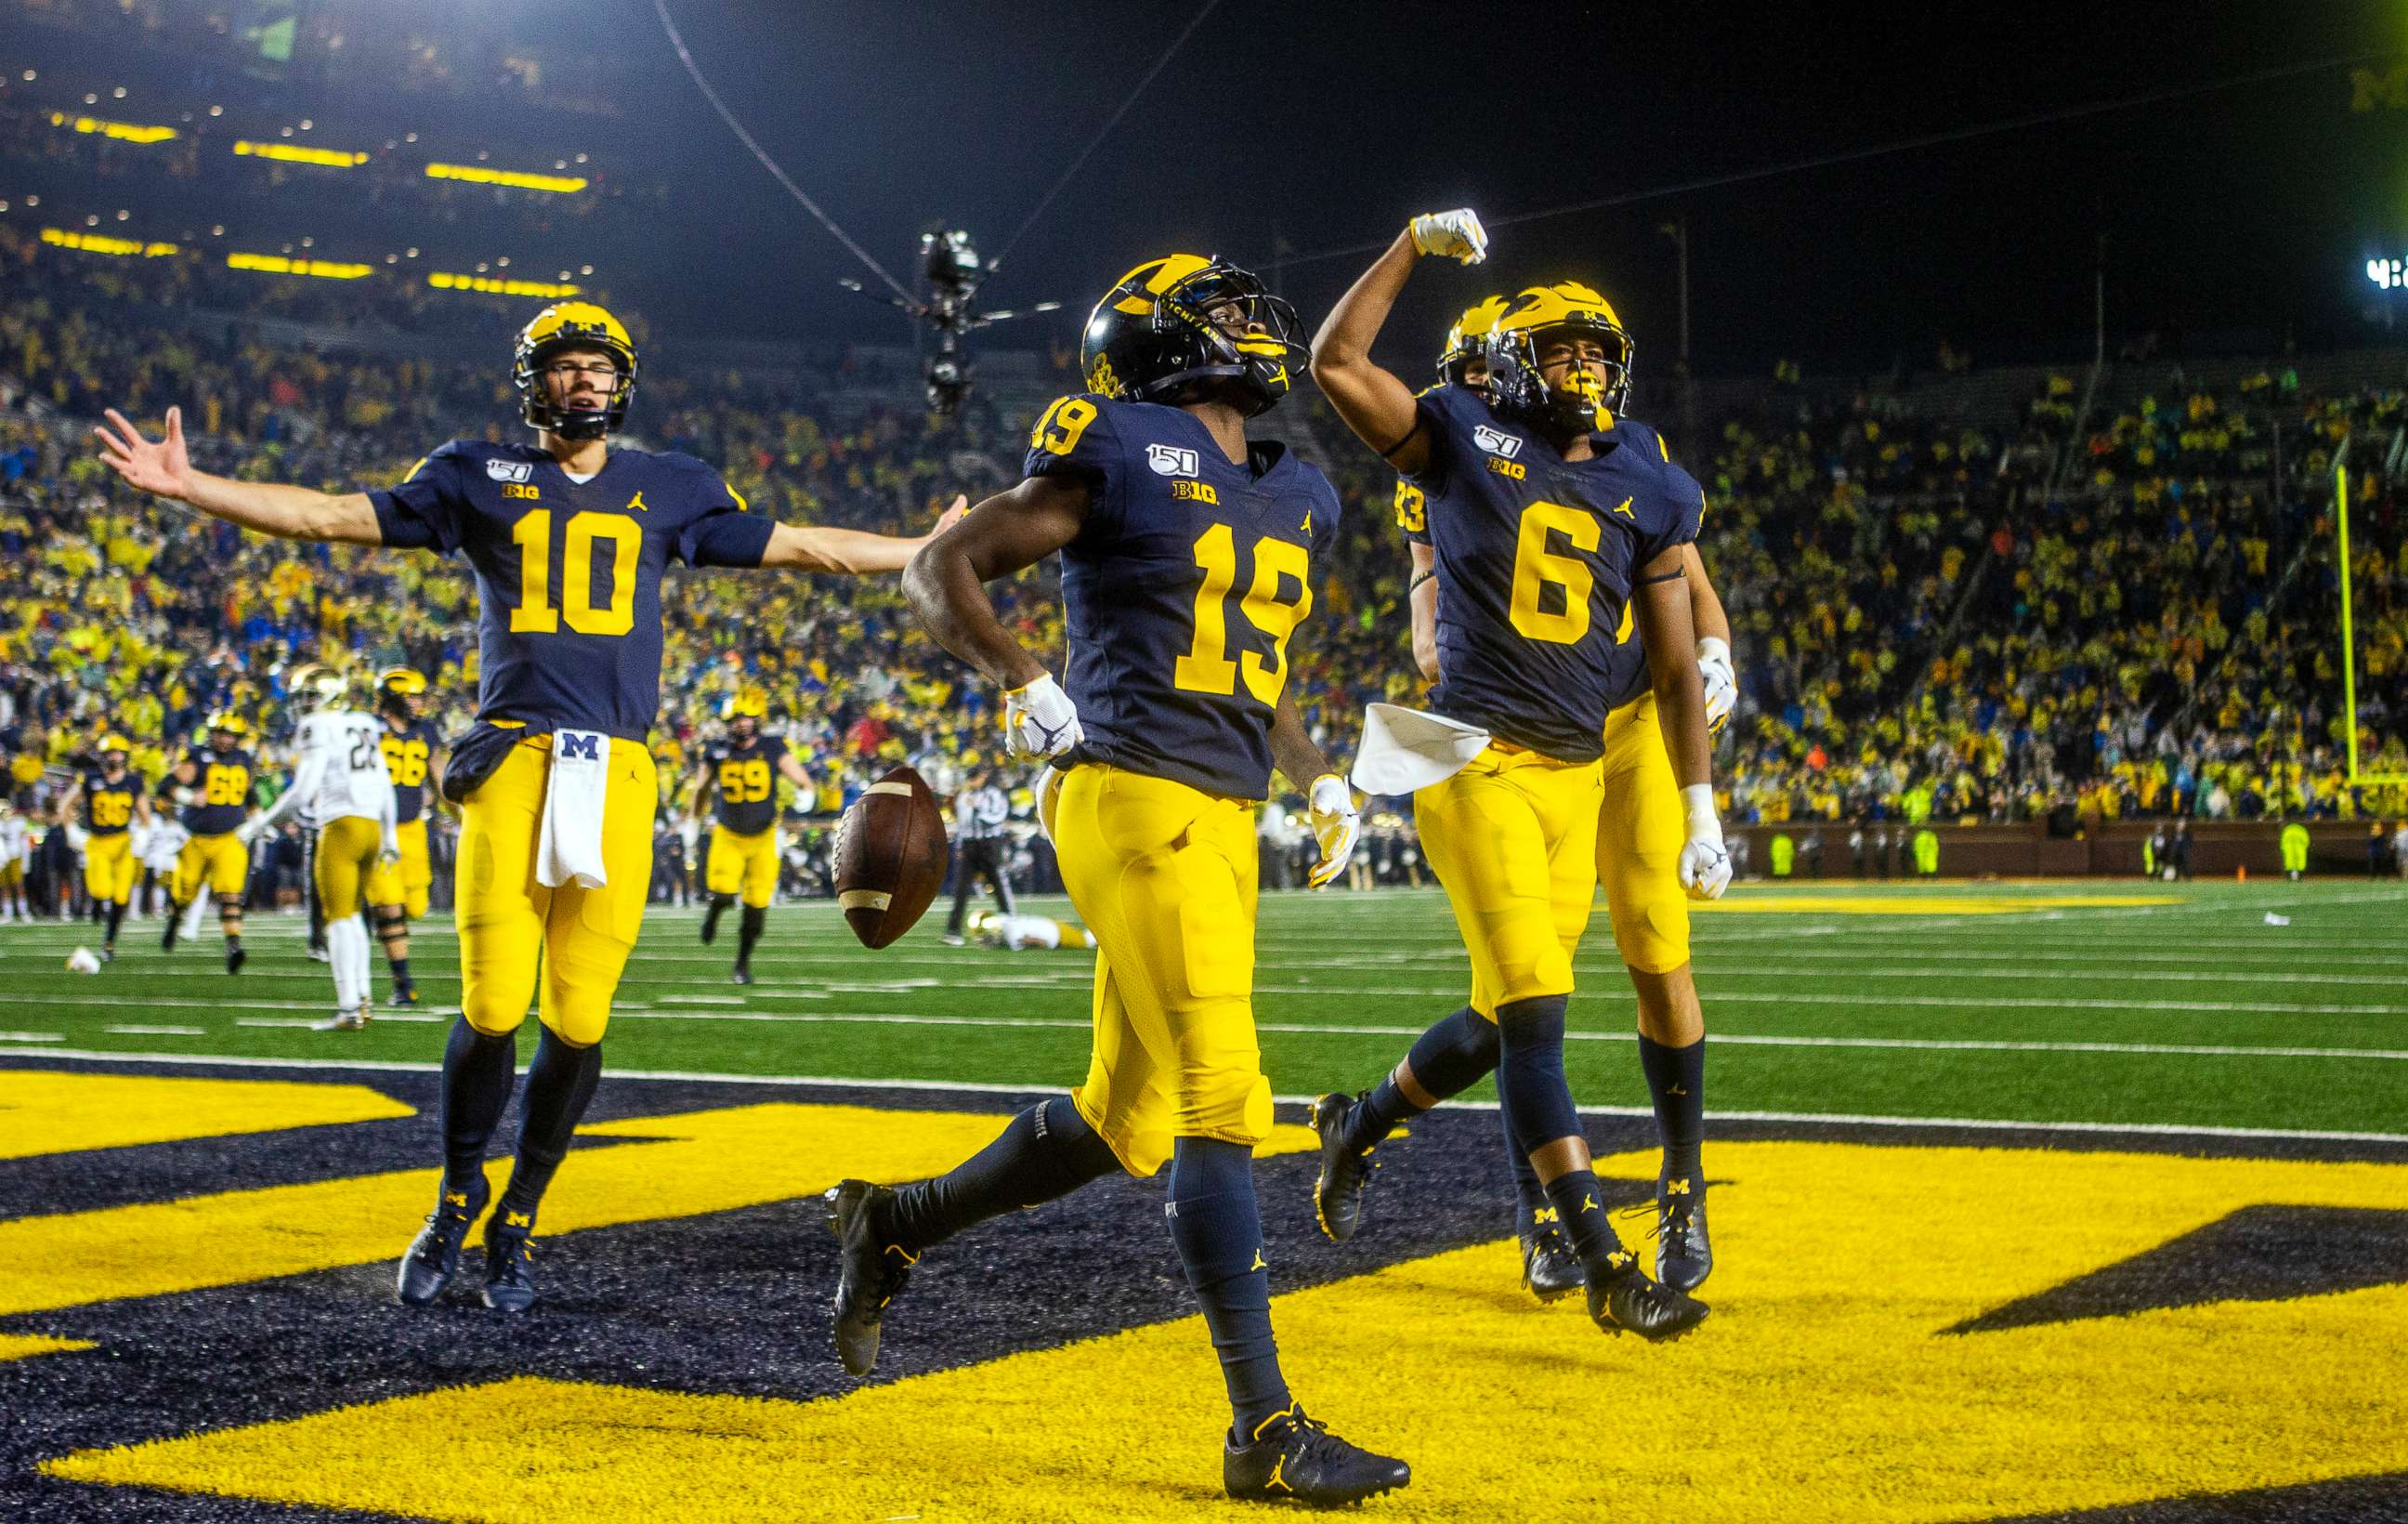 PHOTO: Michigan players celebrate a touchdown in the fourth quarter of an NCAA college football game against Notre Dame in Ann Arbor, Mich., Oct. 26, 2019.